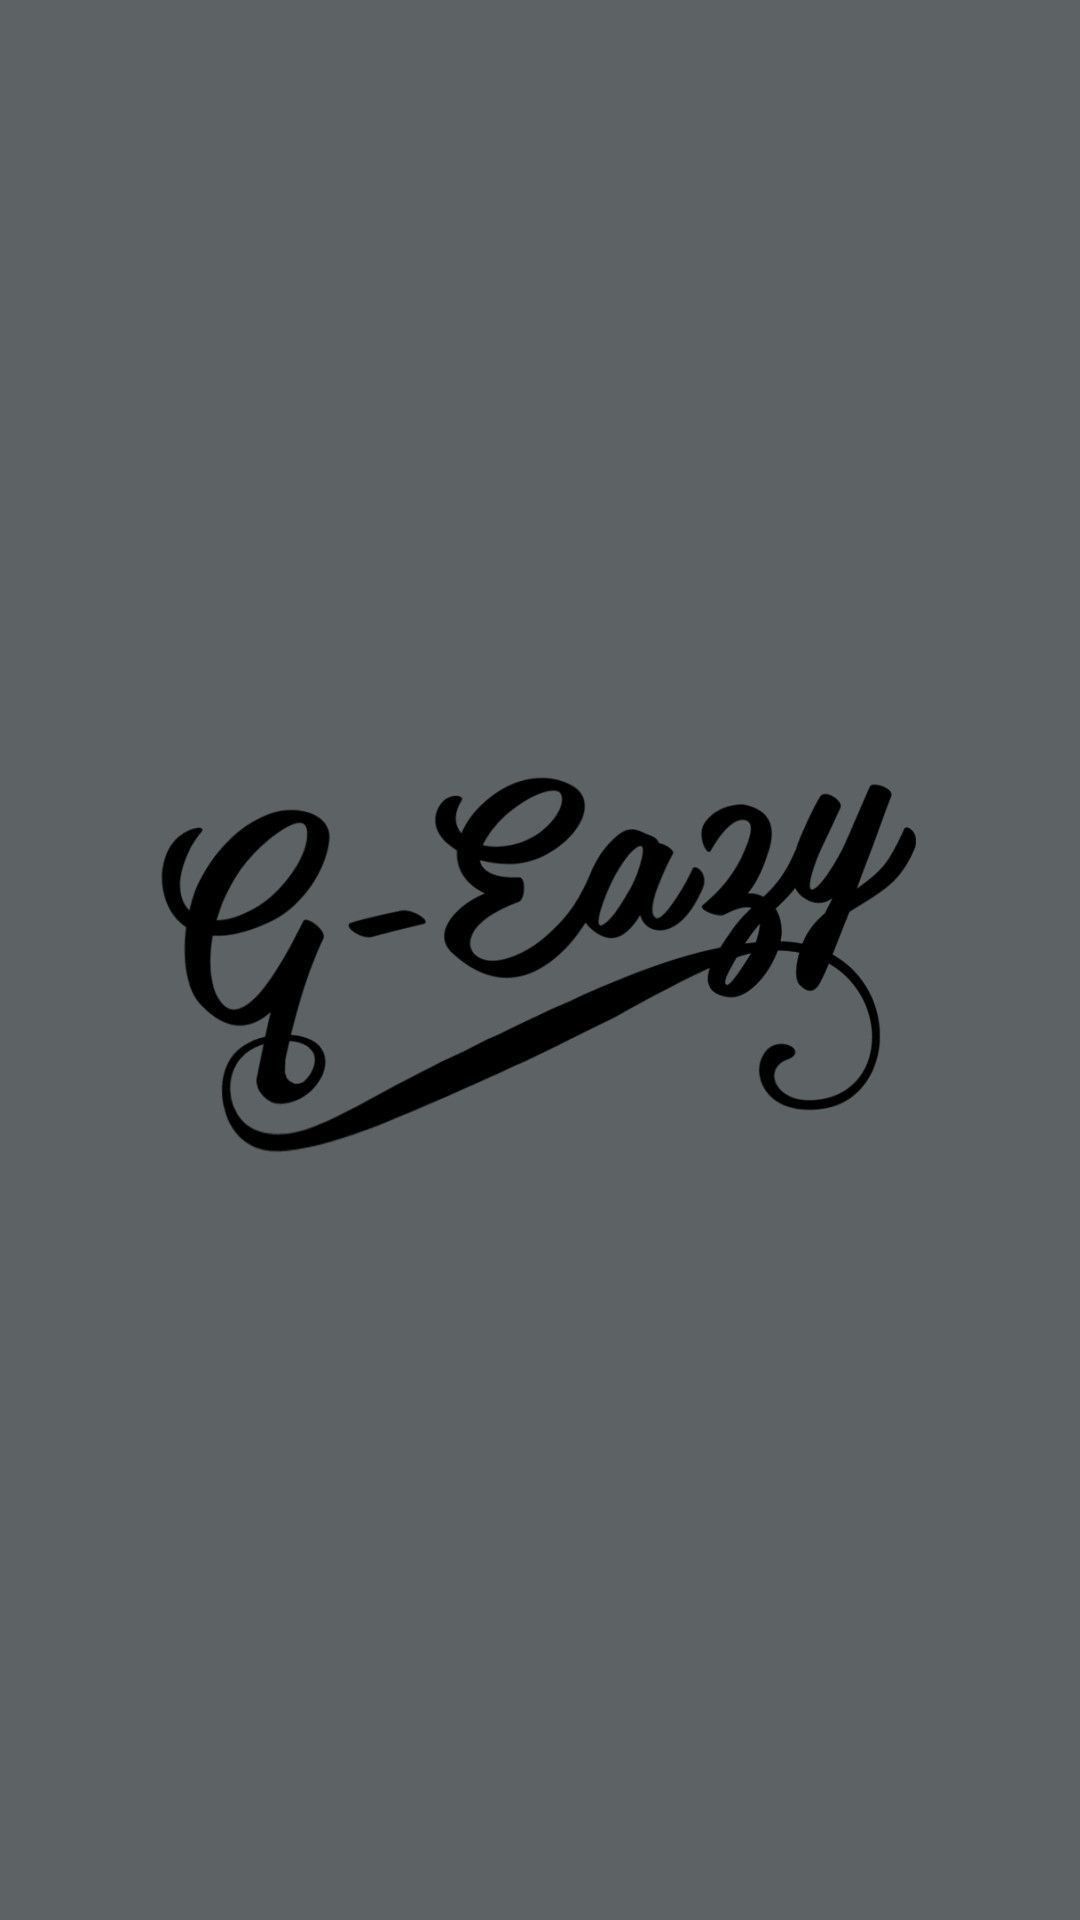 G-Eazy iPhone Wallpapers - Wallpaper Cave